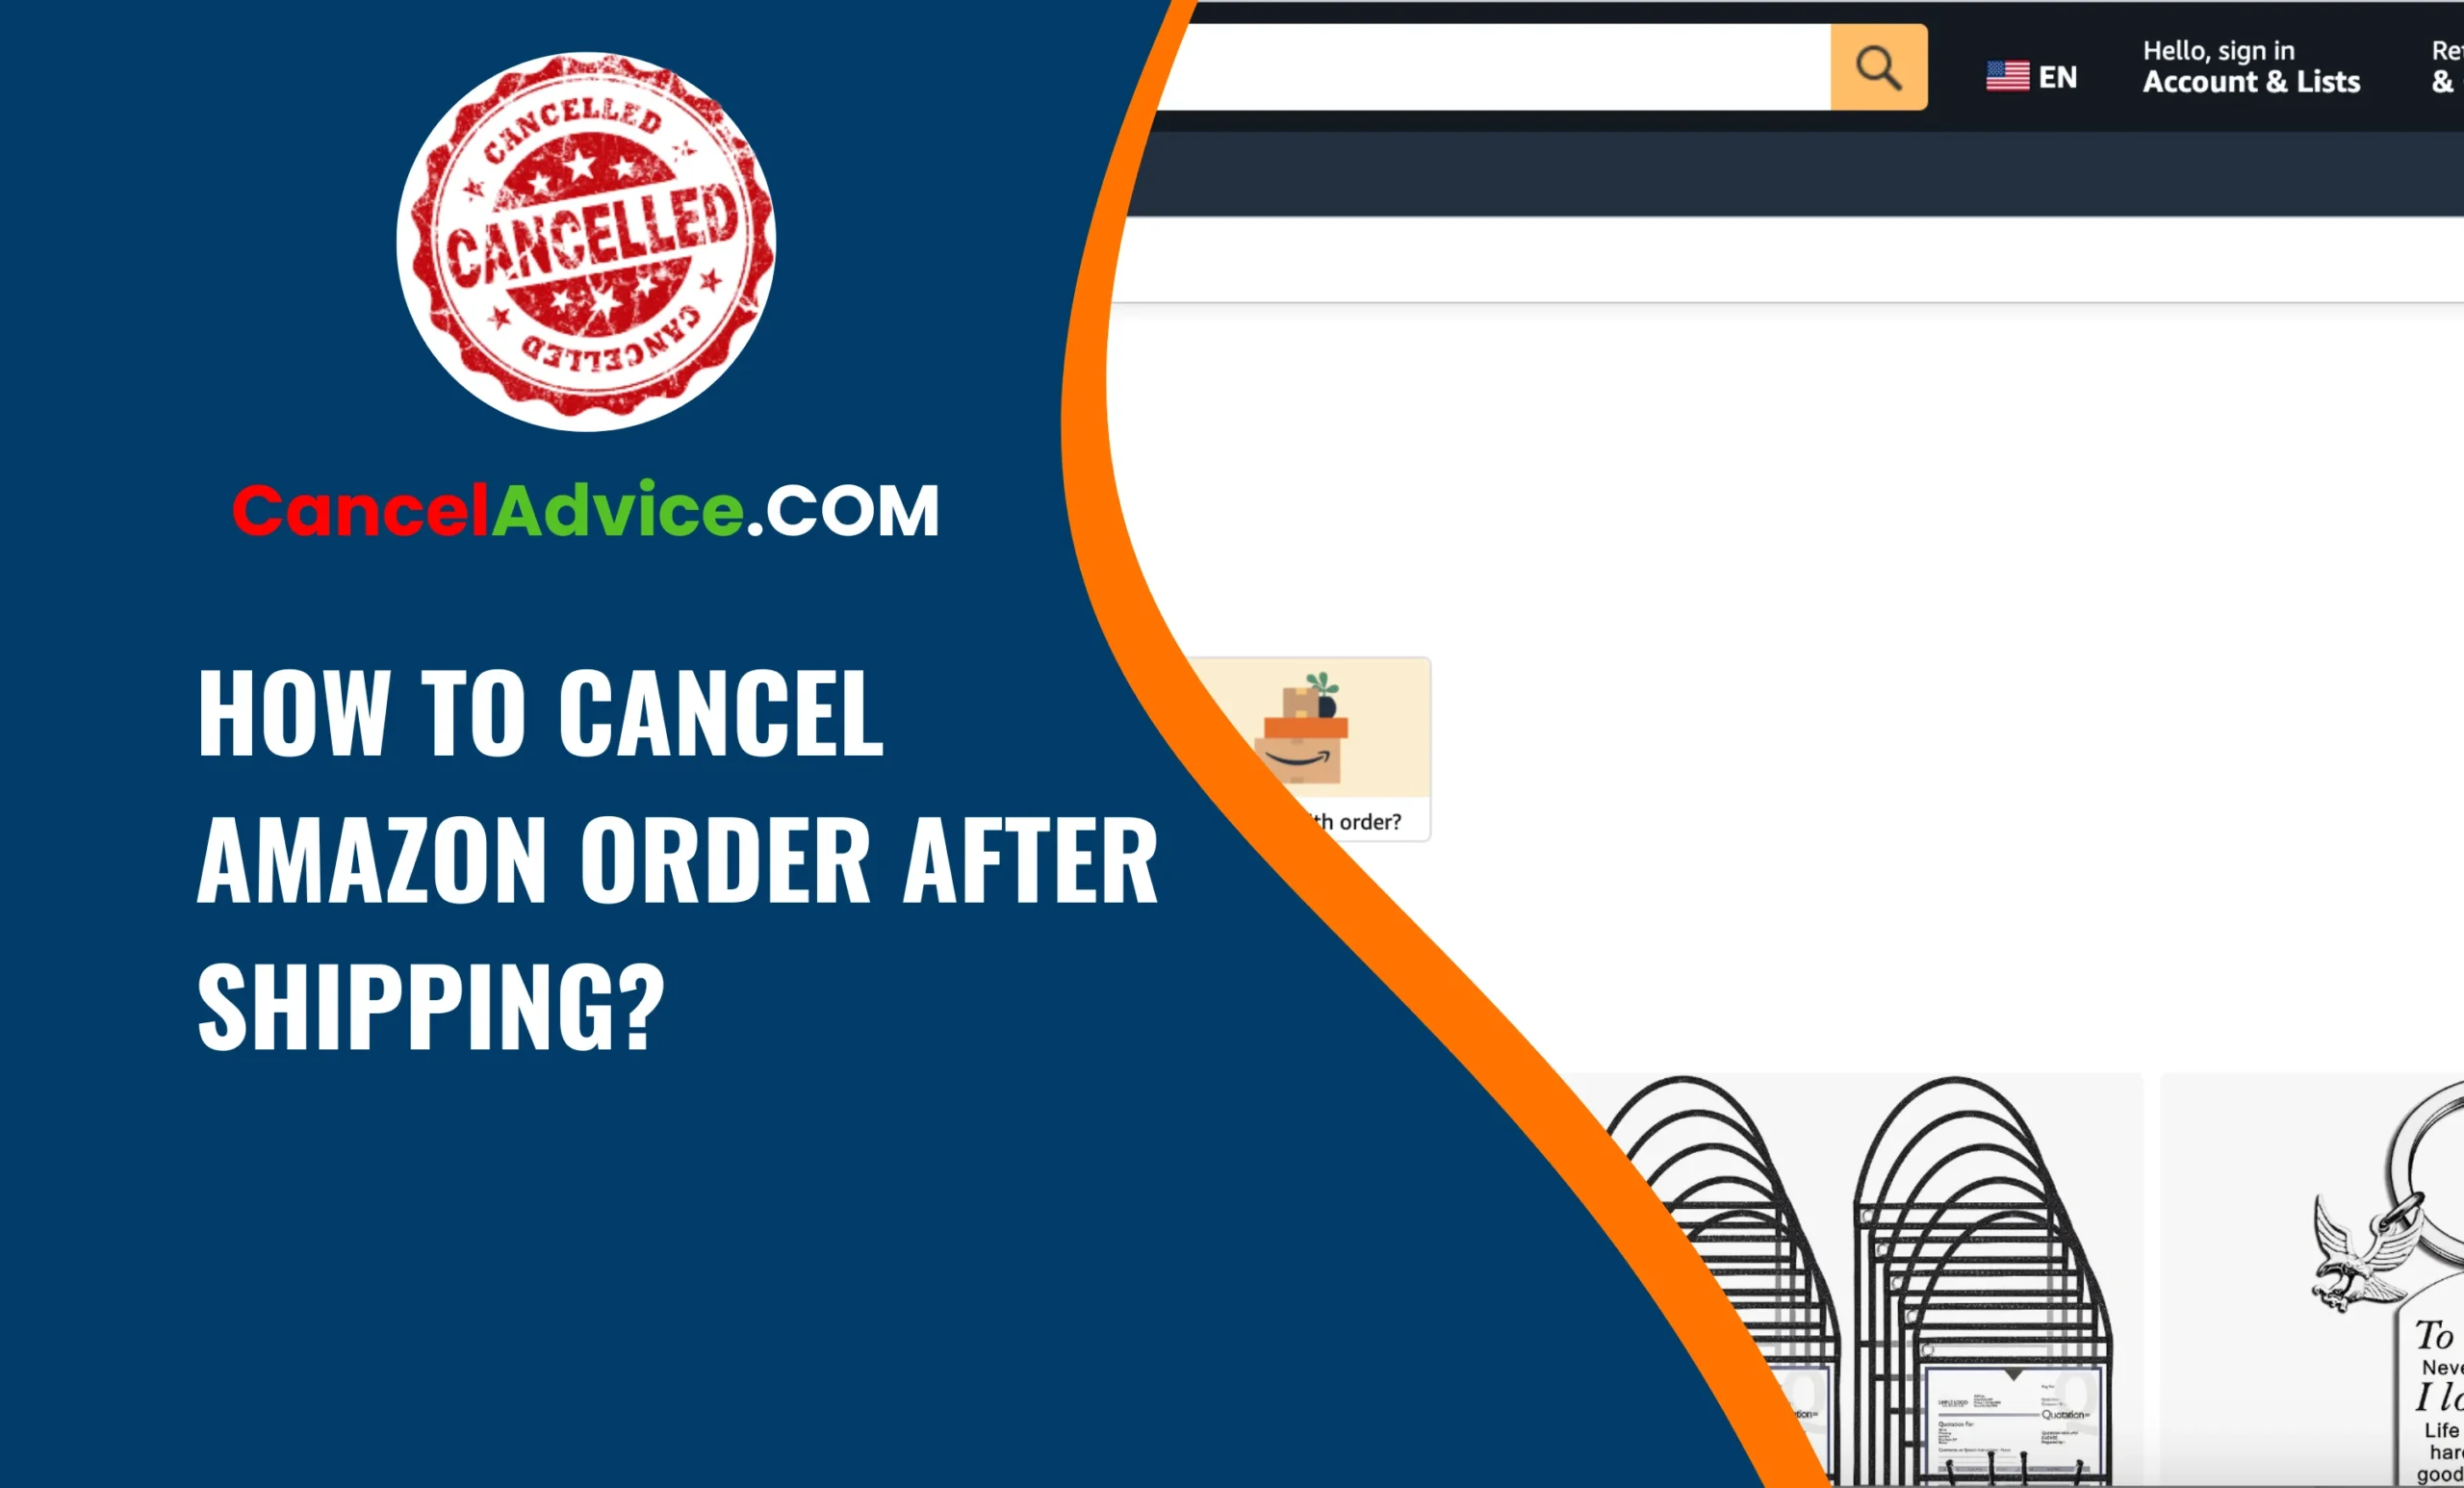 How to Cancel an Amazon Order After Shipping